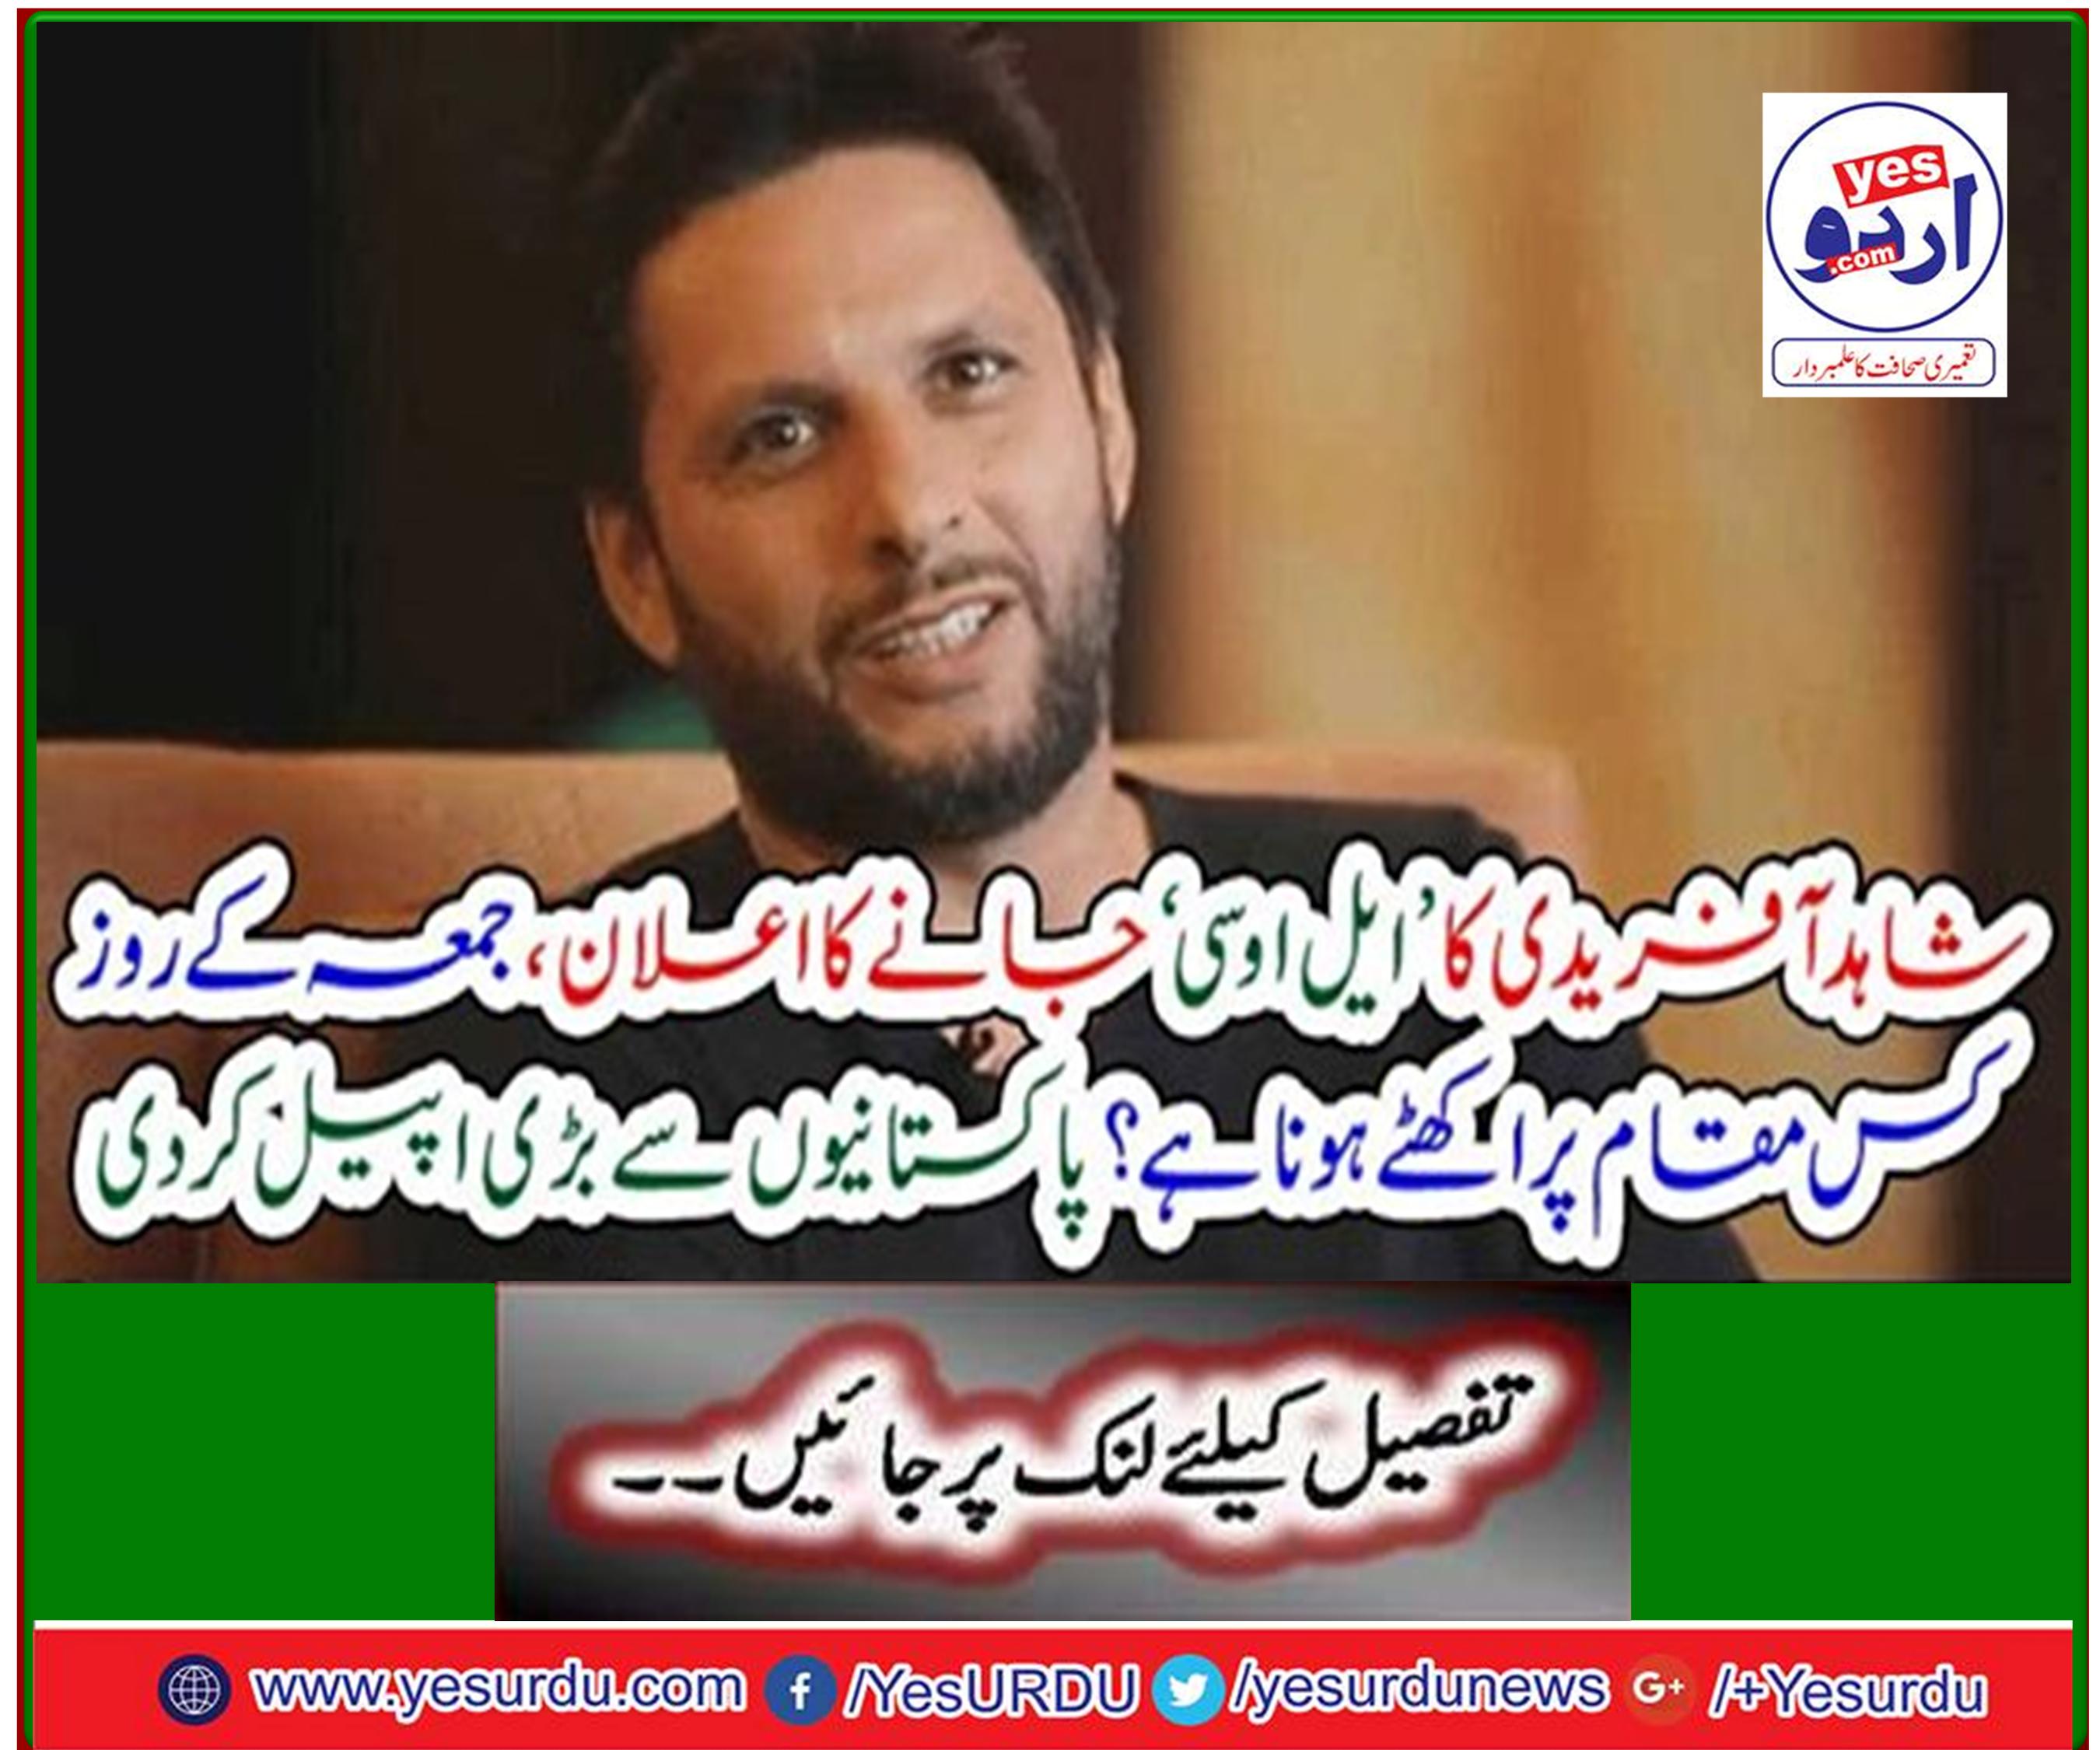 Shahid Afridi's announcement to go to the LoC, where is the gathering on Friday? Great appeal from Pakistanis